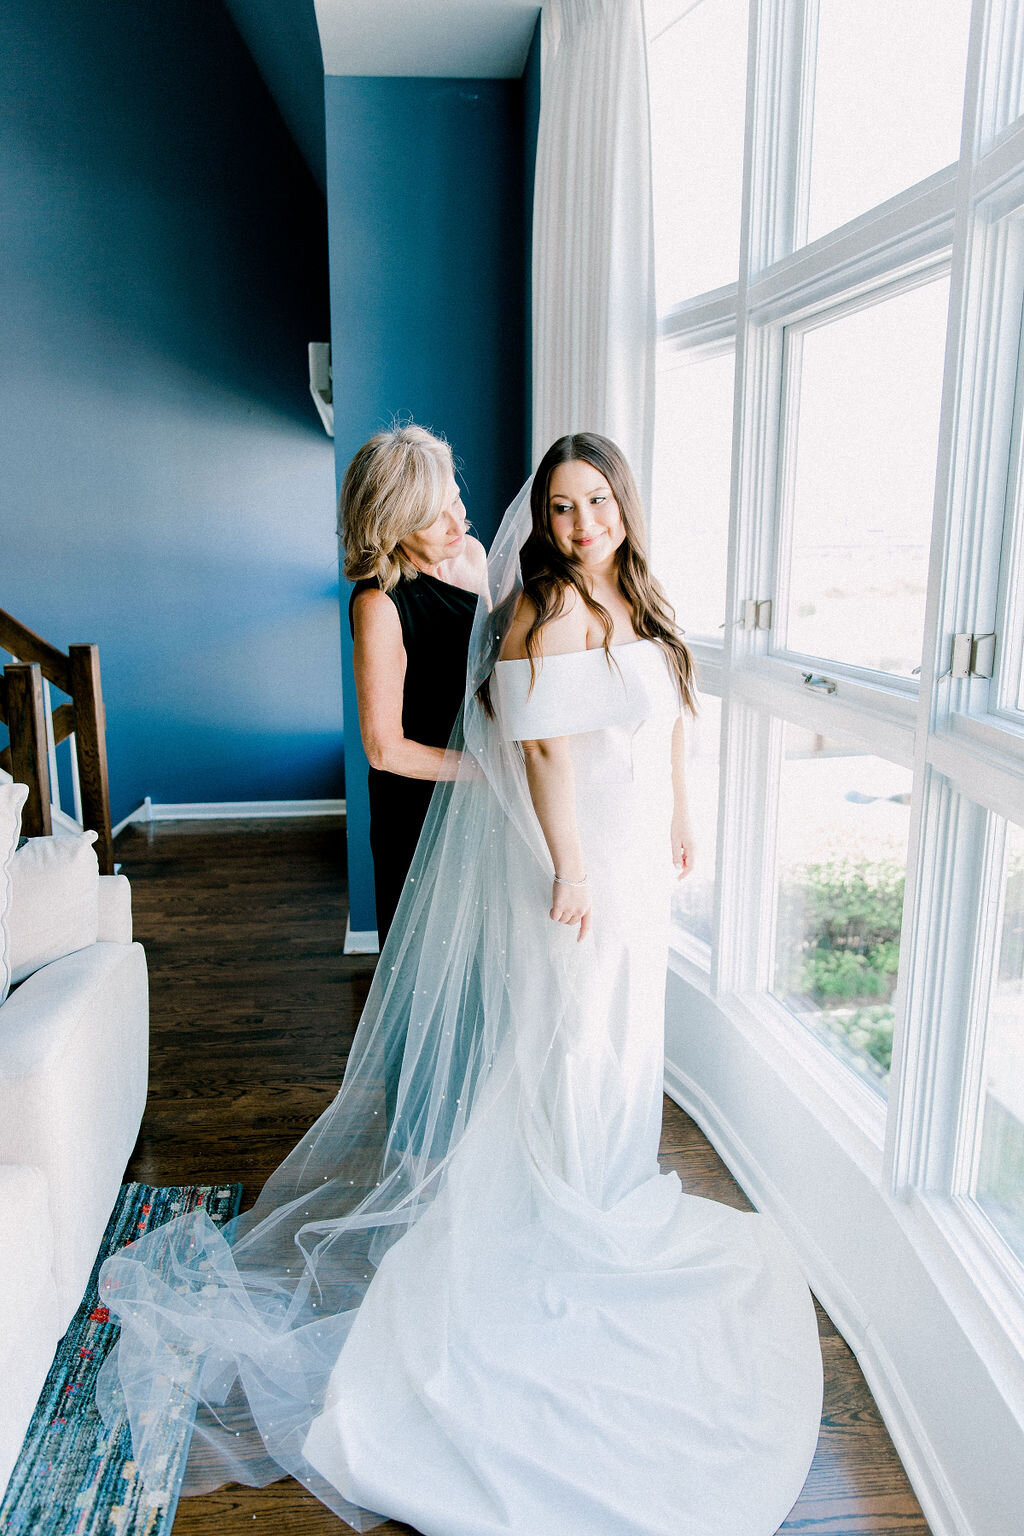 A heartwarming moment of a mother helping her daughter into her wedding dress, capturing the intimate and emotional pre-wedding preparations​